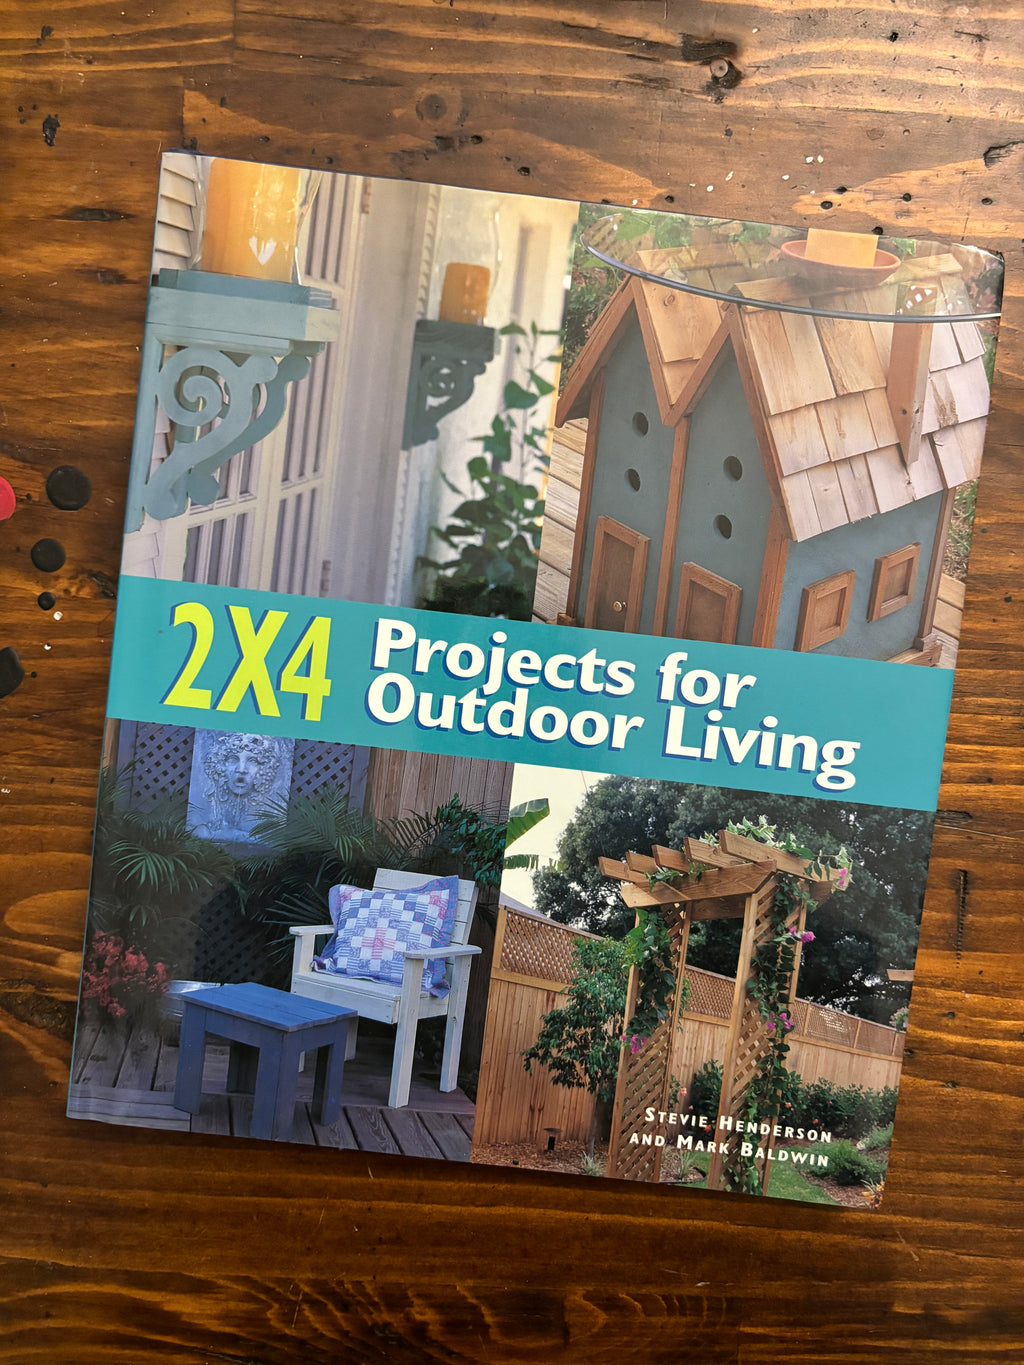 2X4 Projects for Outdoor Living- By Stevie Henderson and Mark Baldwin